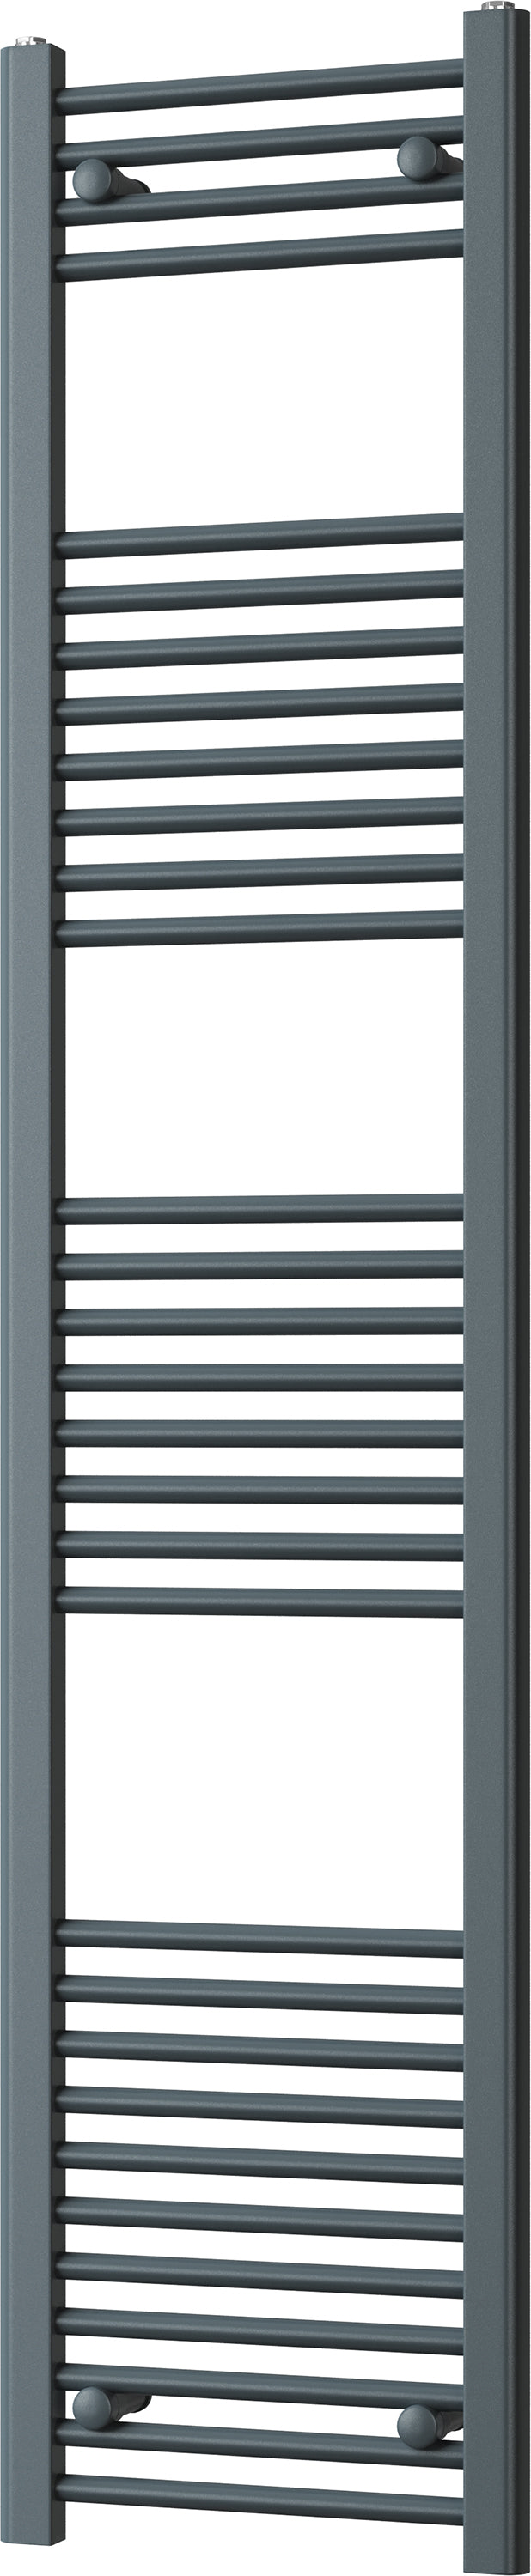 Zennor - Anthracite Heated Towel Rail - H1800mm x W400mm - Straight